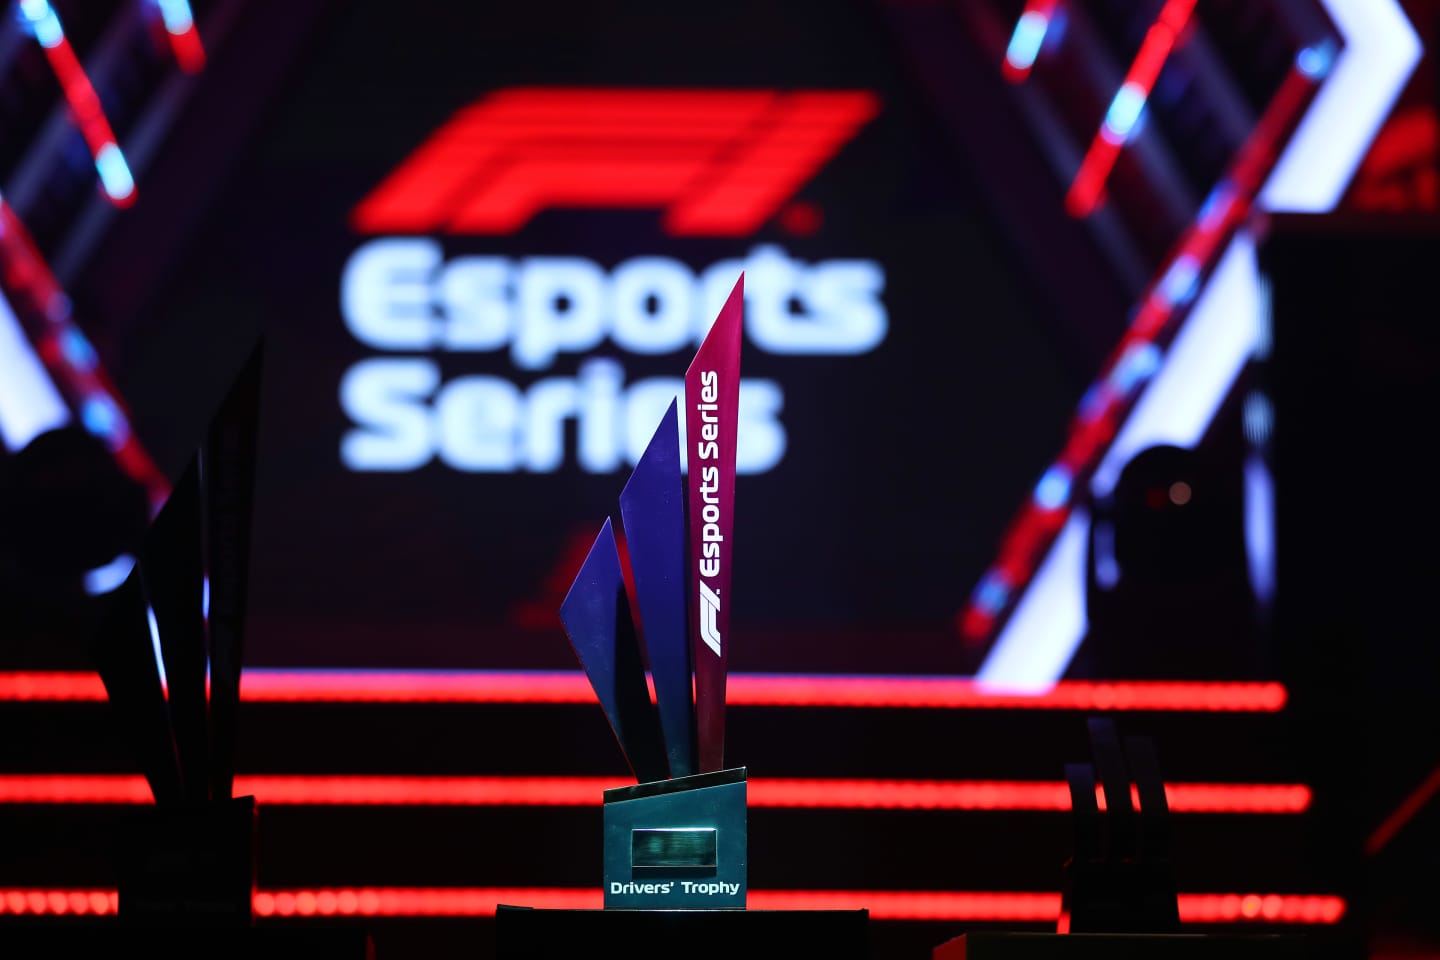 FULHAM, ENGLAND - NOVEMBER 17: The F1 eSports trophy is seen during the Red Bull Racing eSports